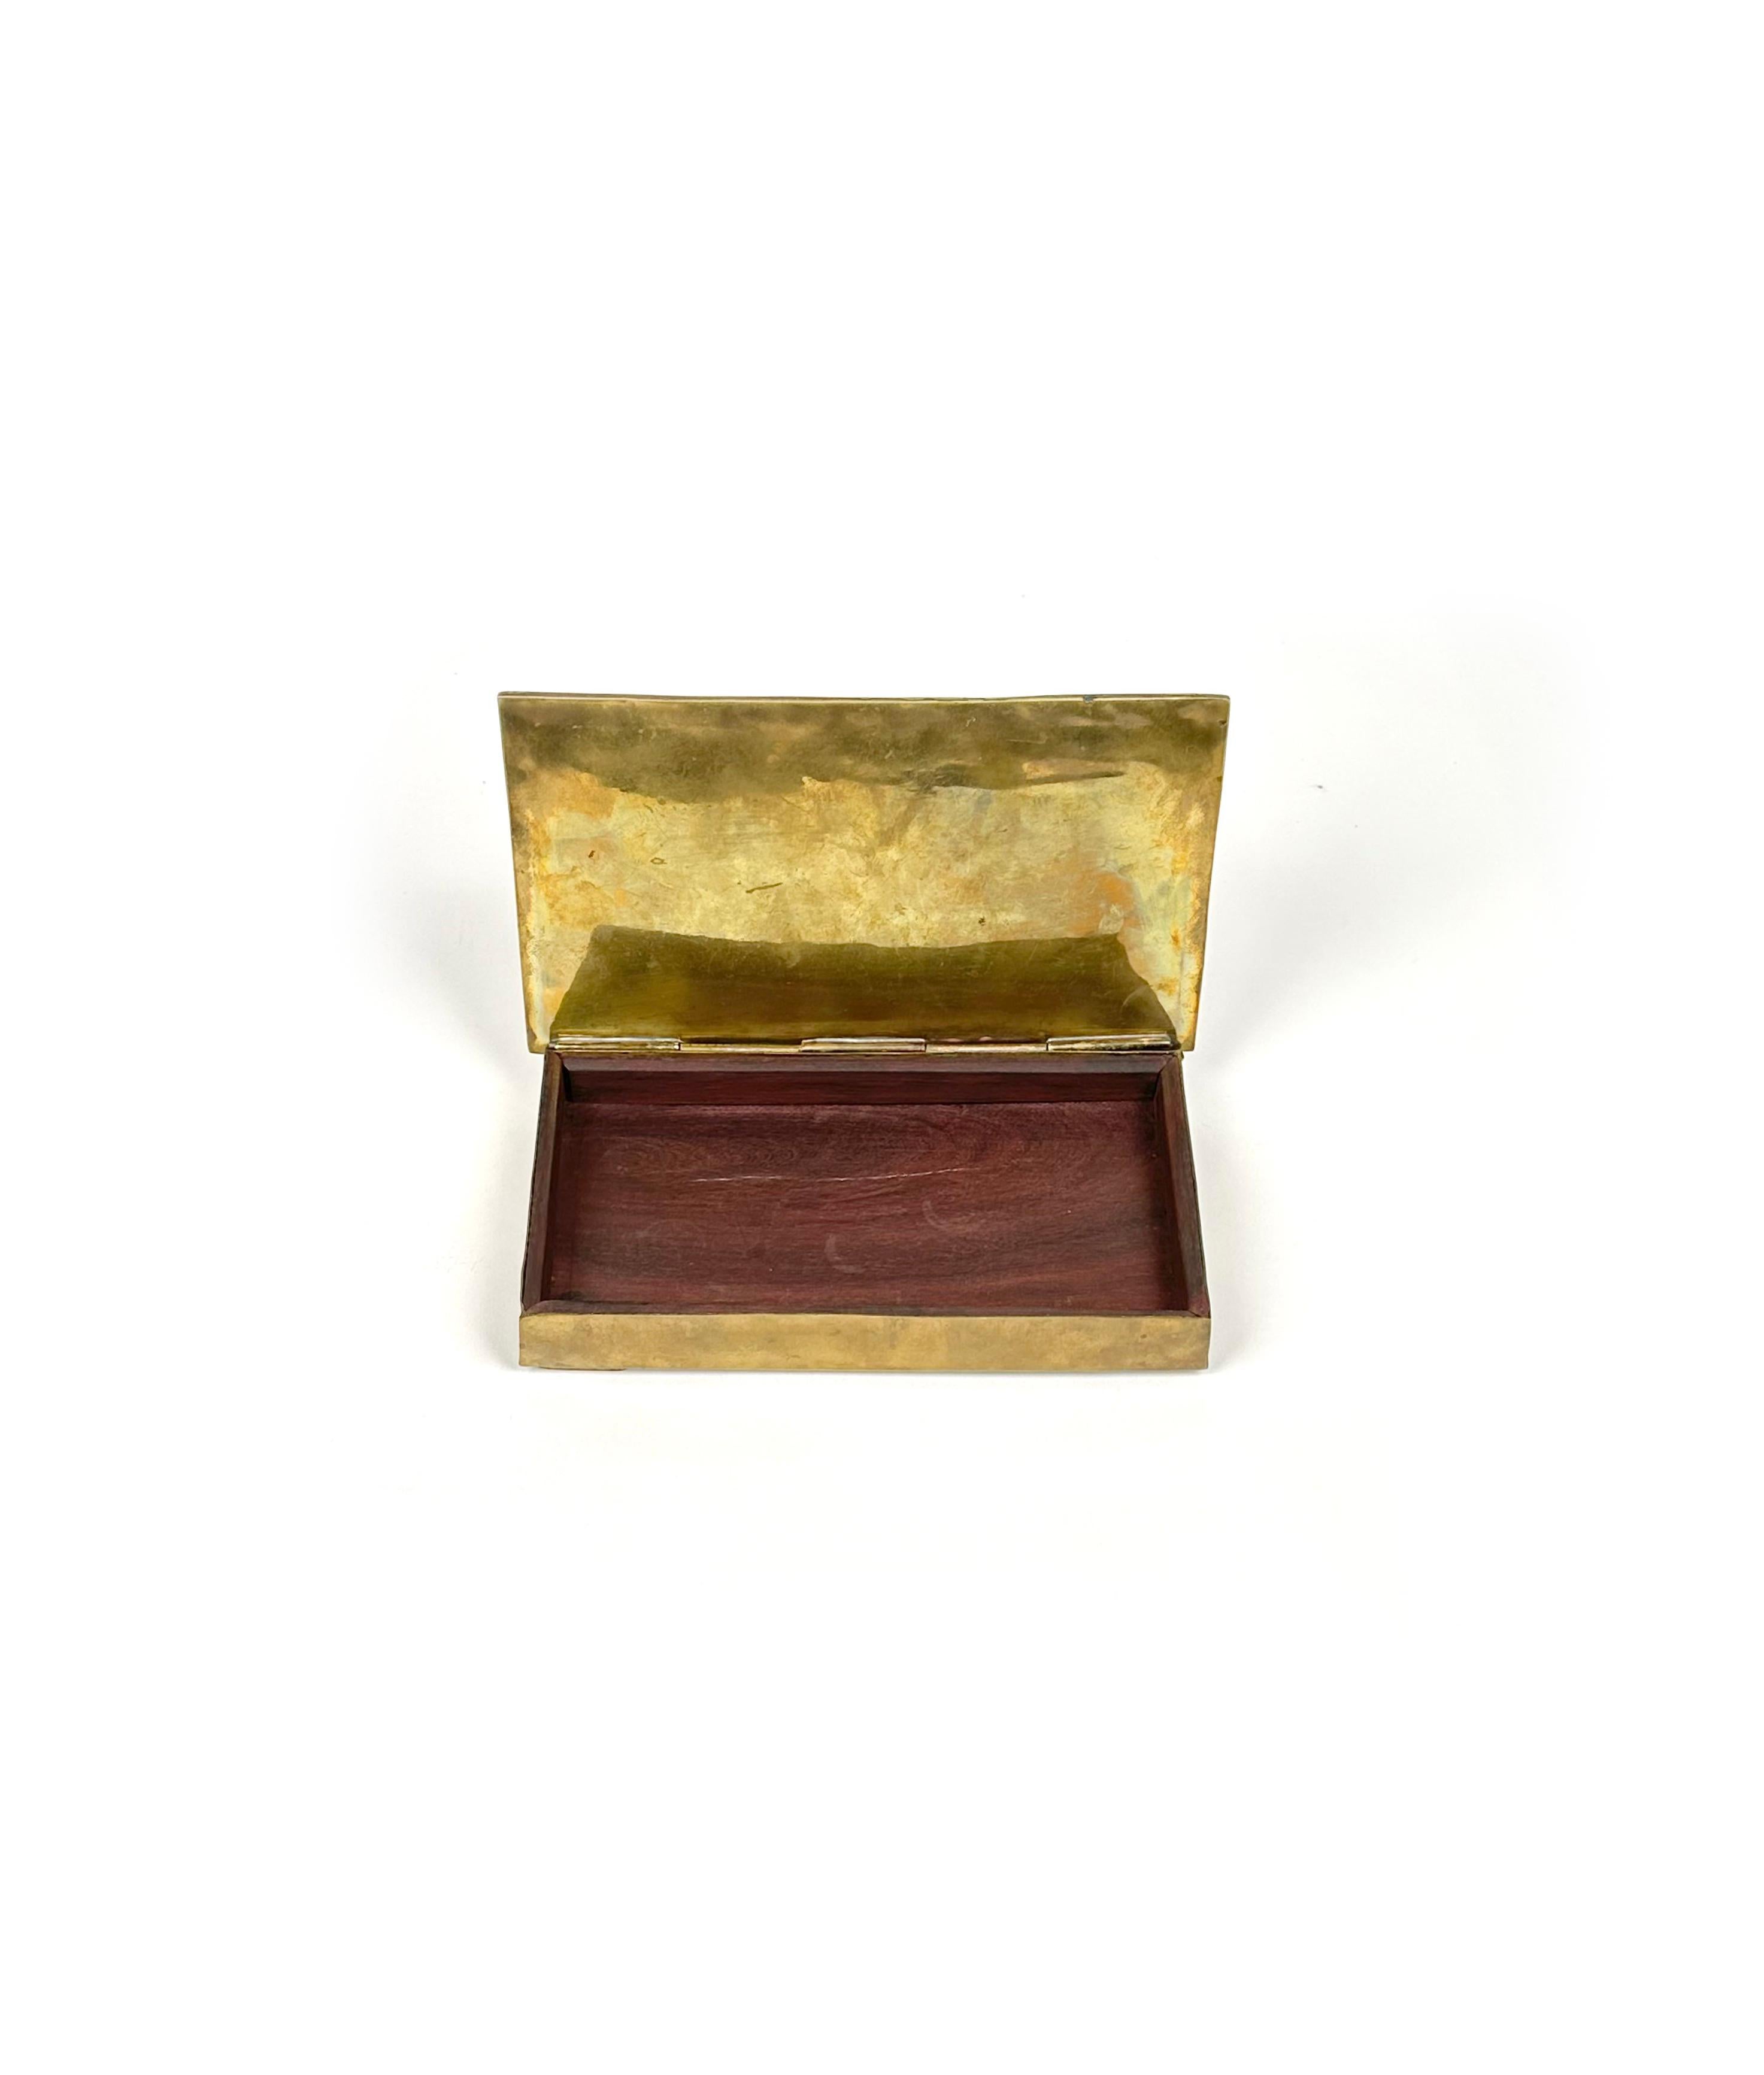 Mexican Decorative Cigar Box in Brass, Malachite and Wood, Mexico, 1960s For Sale